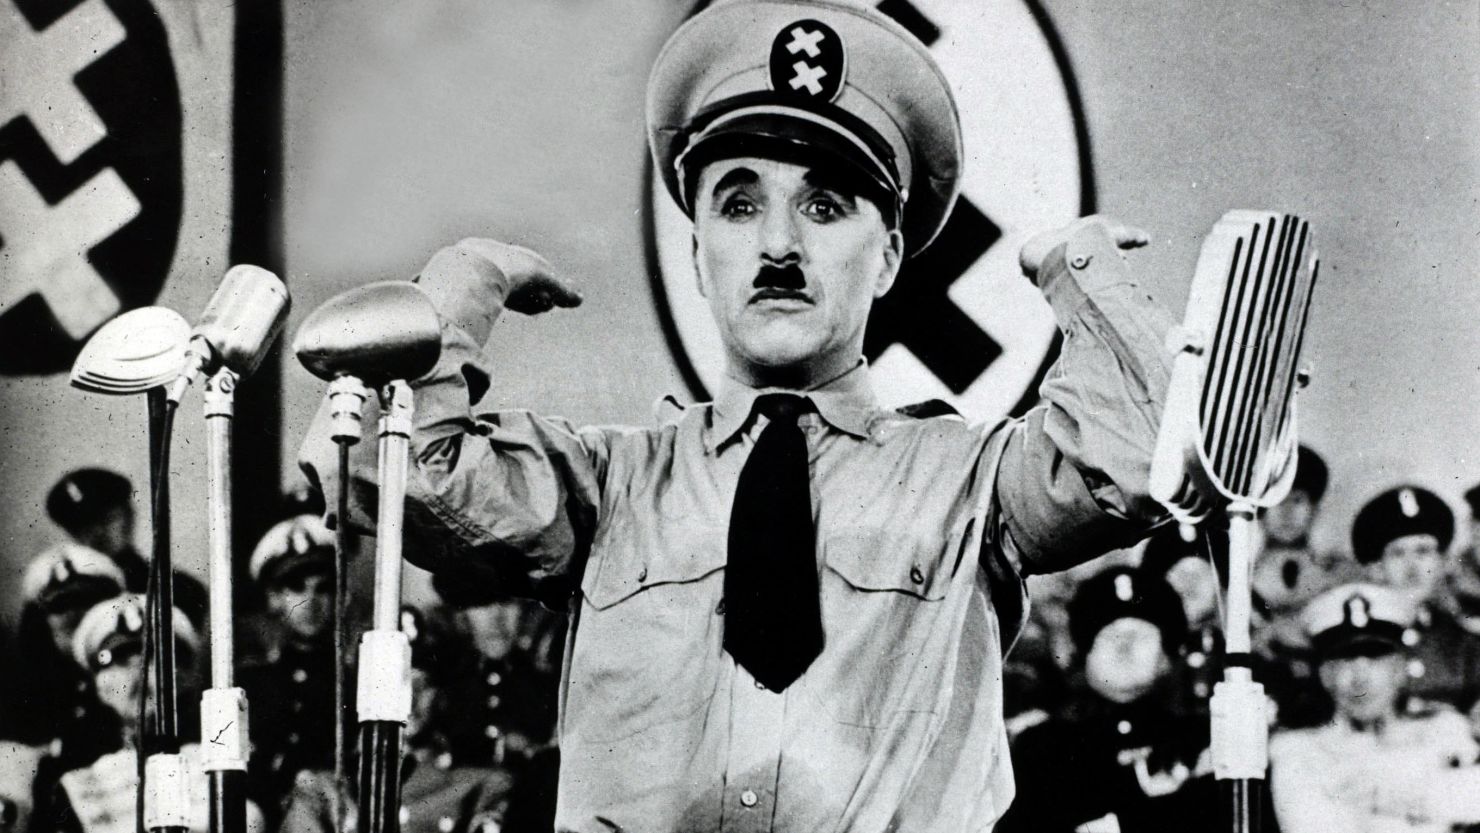 When Hitler ruled Germany, comedian Charlie Chaplin lampooned him in "The Great Dictator." 